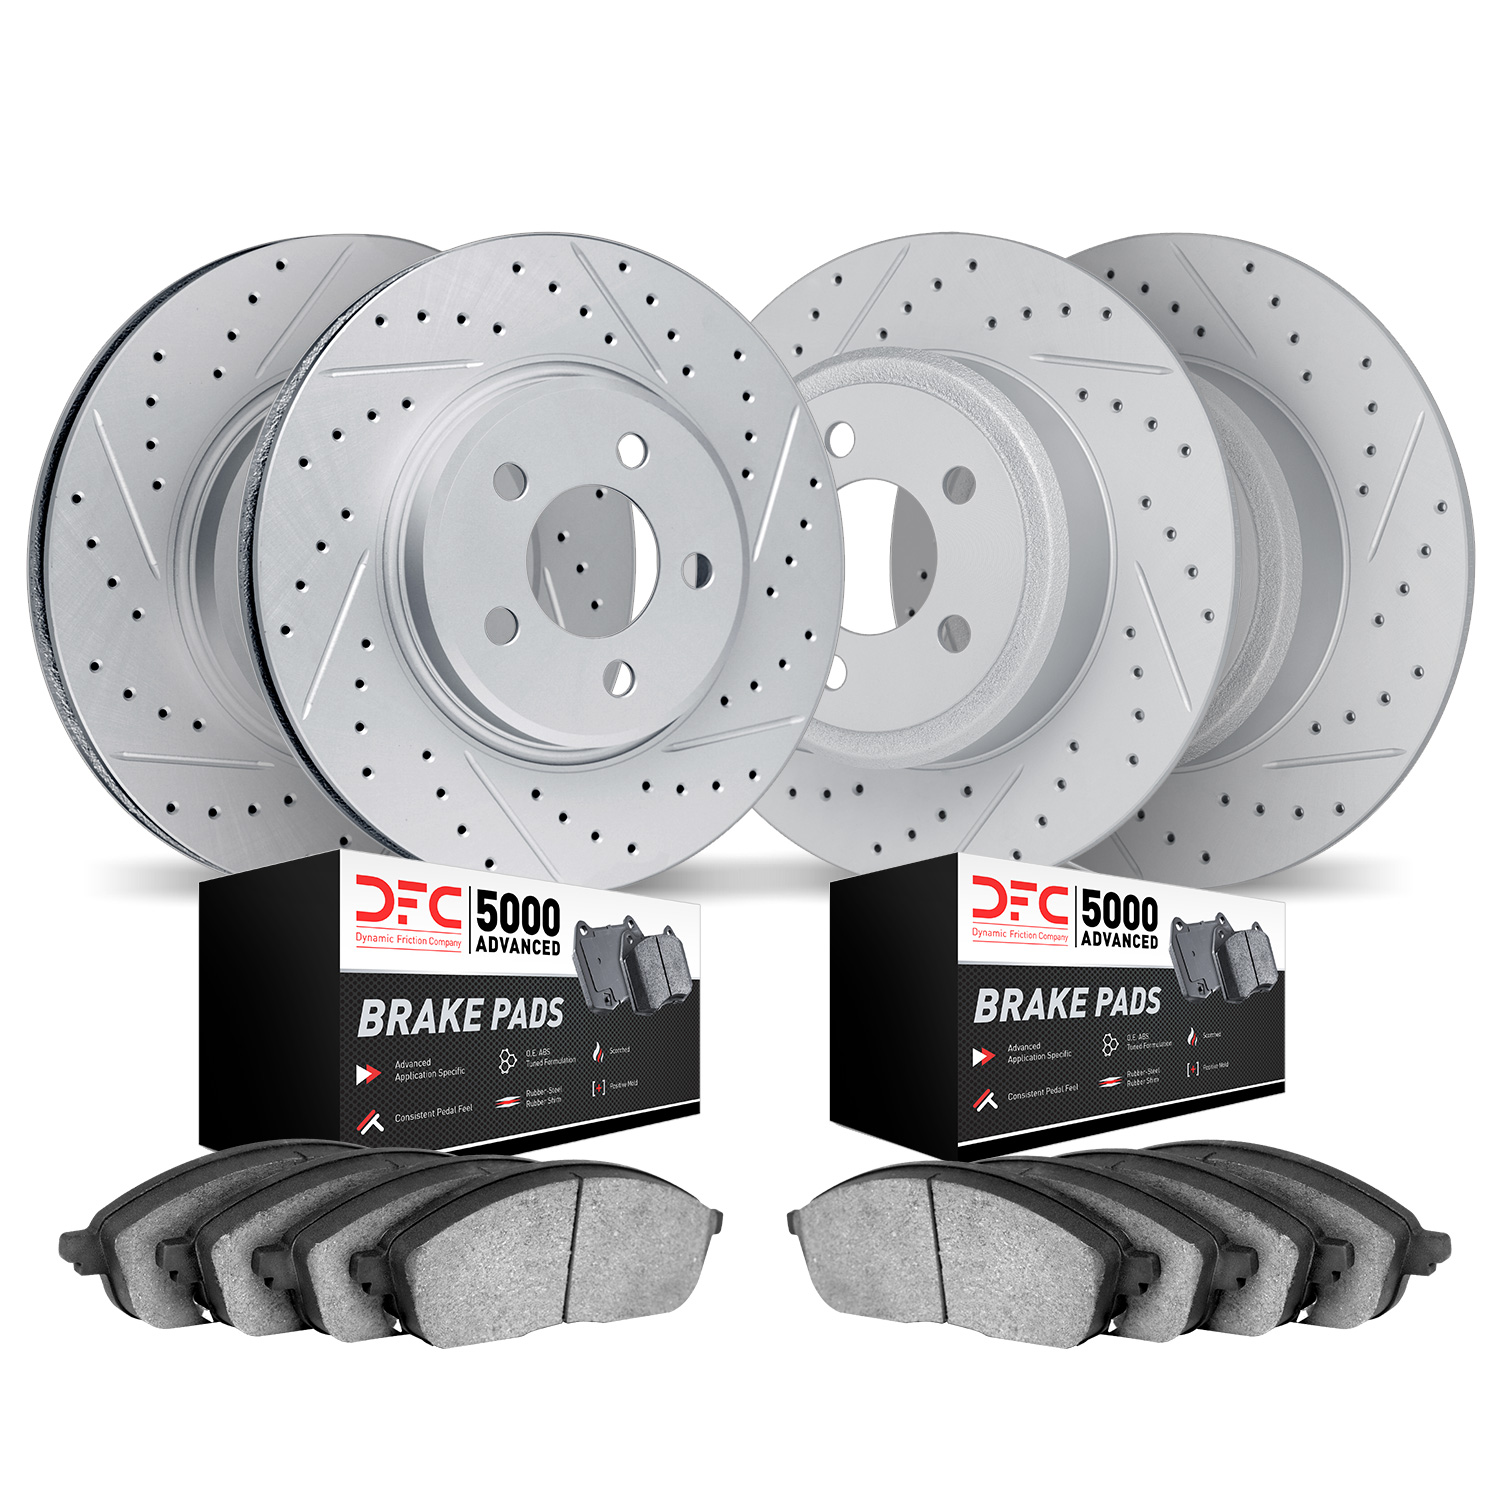 2504-59041 Geoperformance Drilled/Slotted Rotors w/5000 Advanced Brake Pads Kit, 2002-2004 Acura/Honda, Position: Front and Rear